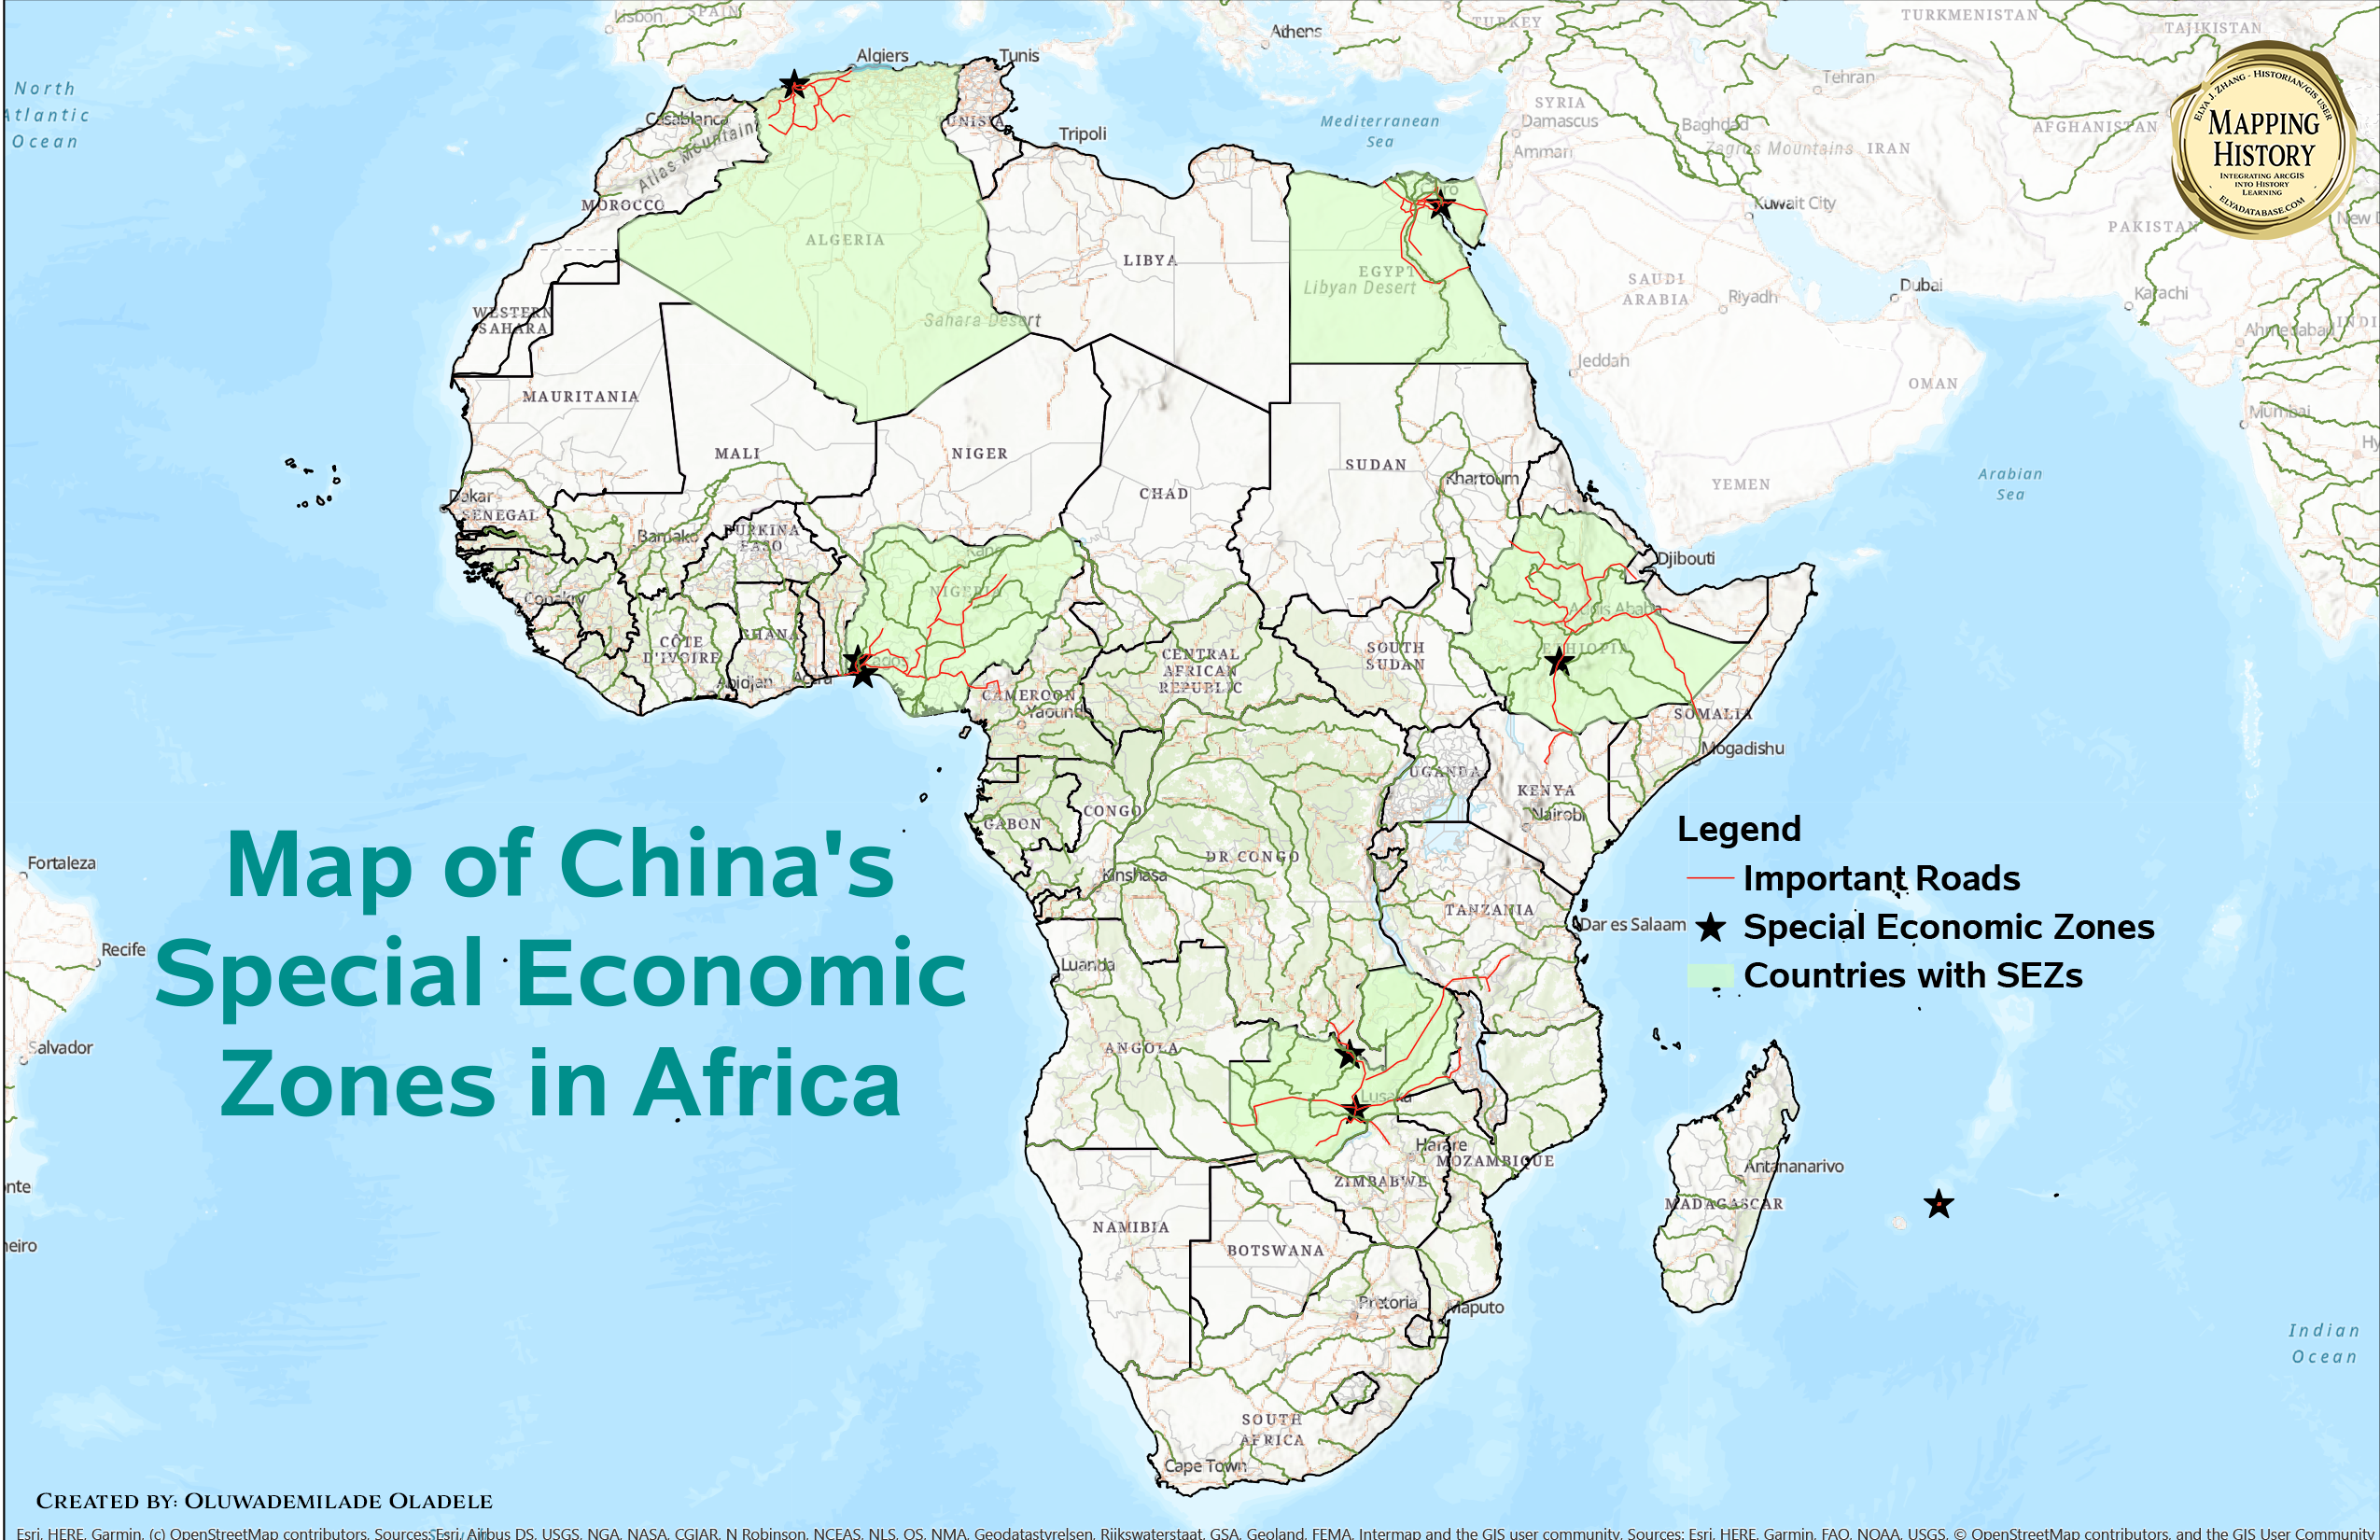 Map of China’s Special Economic Zones in Africa